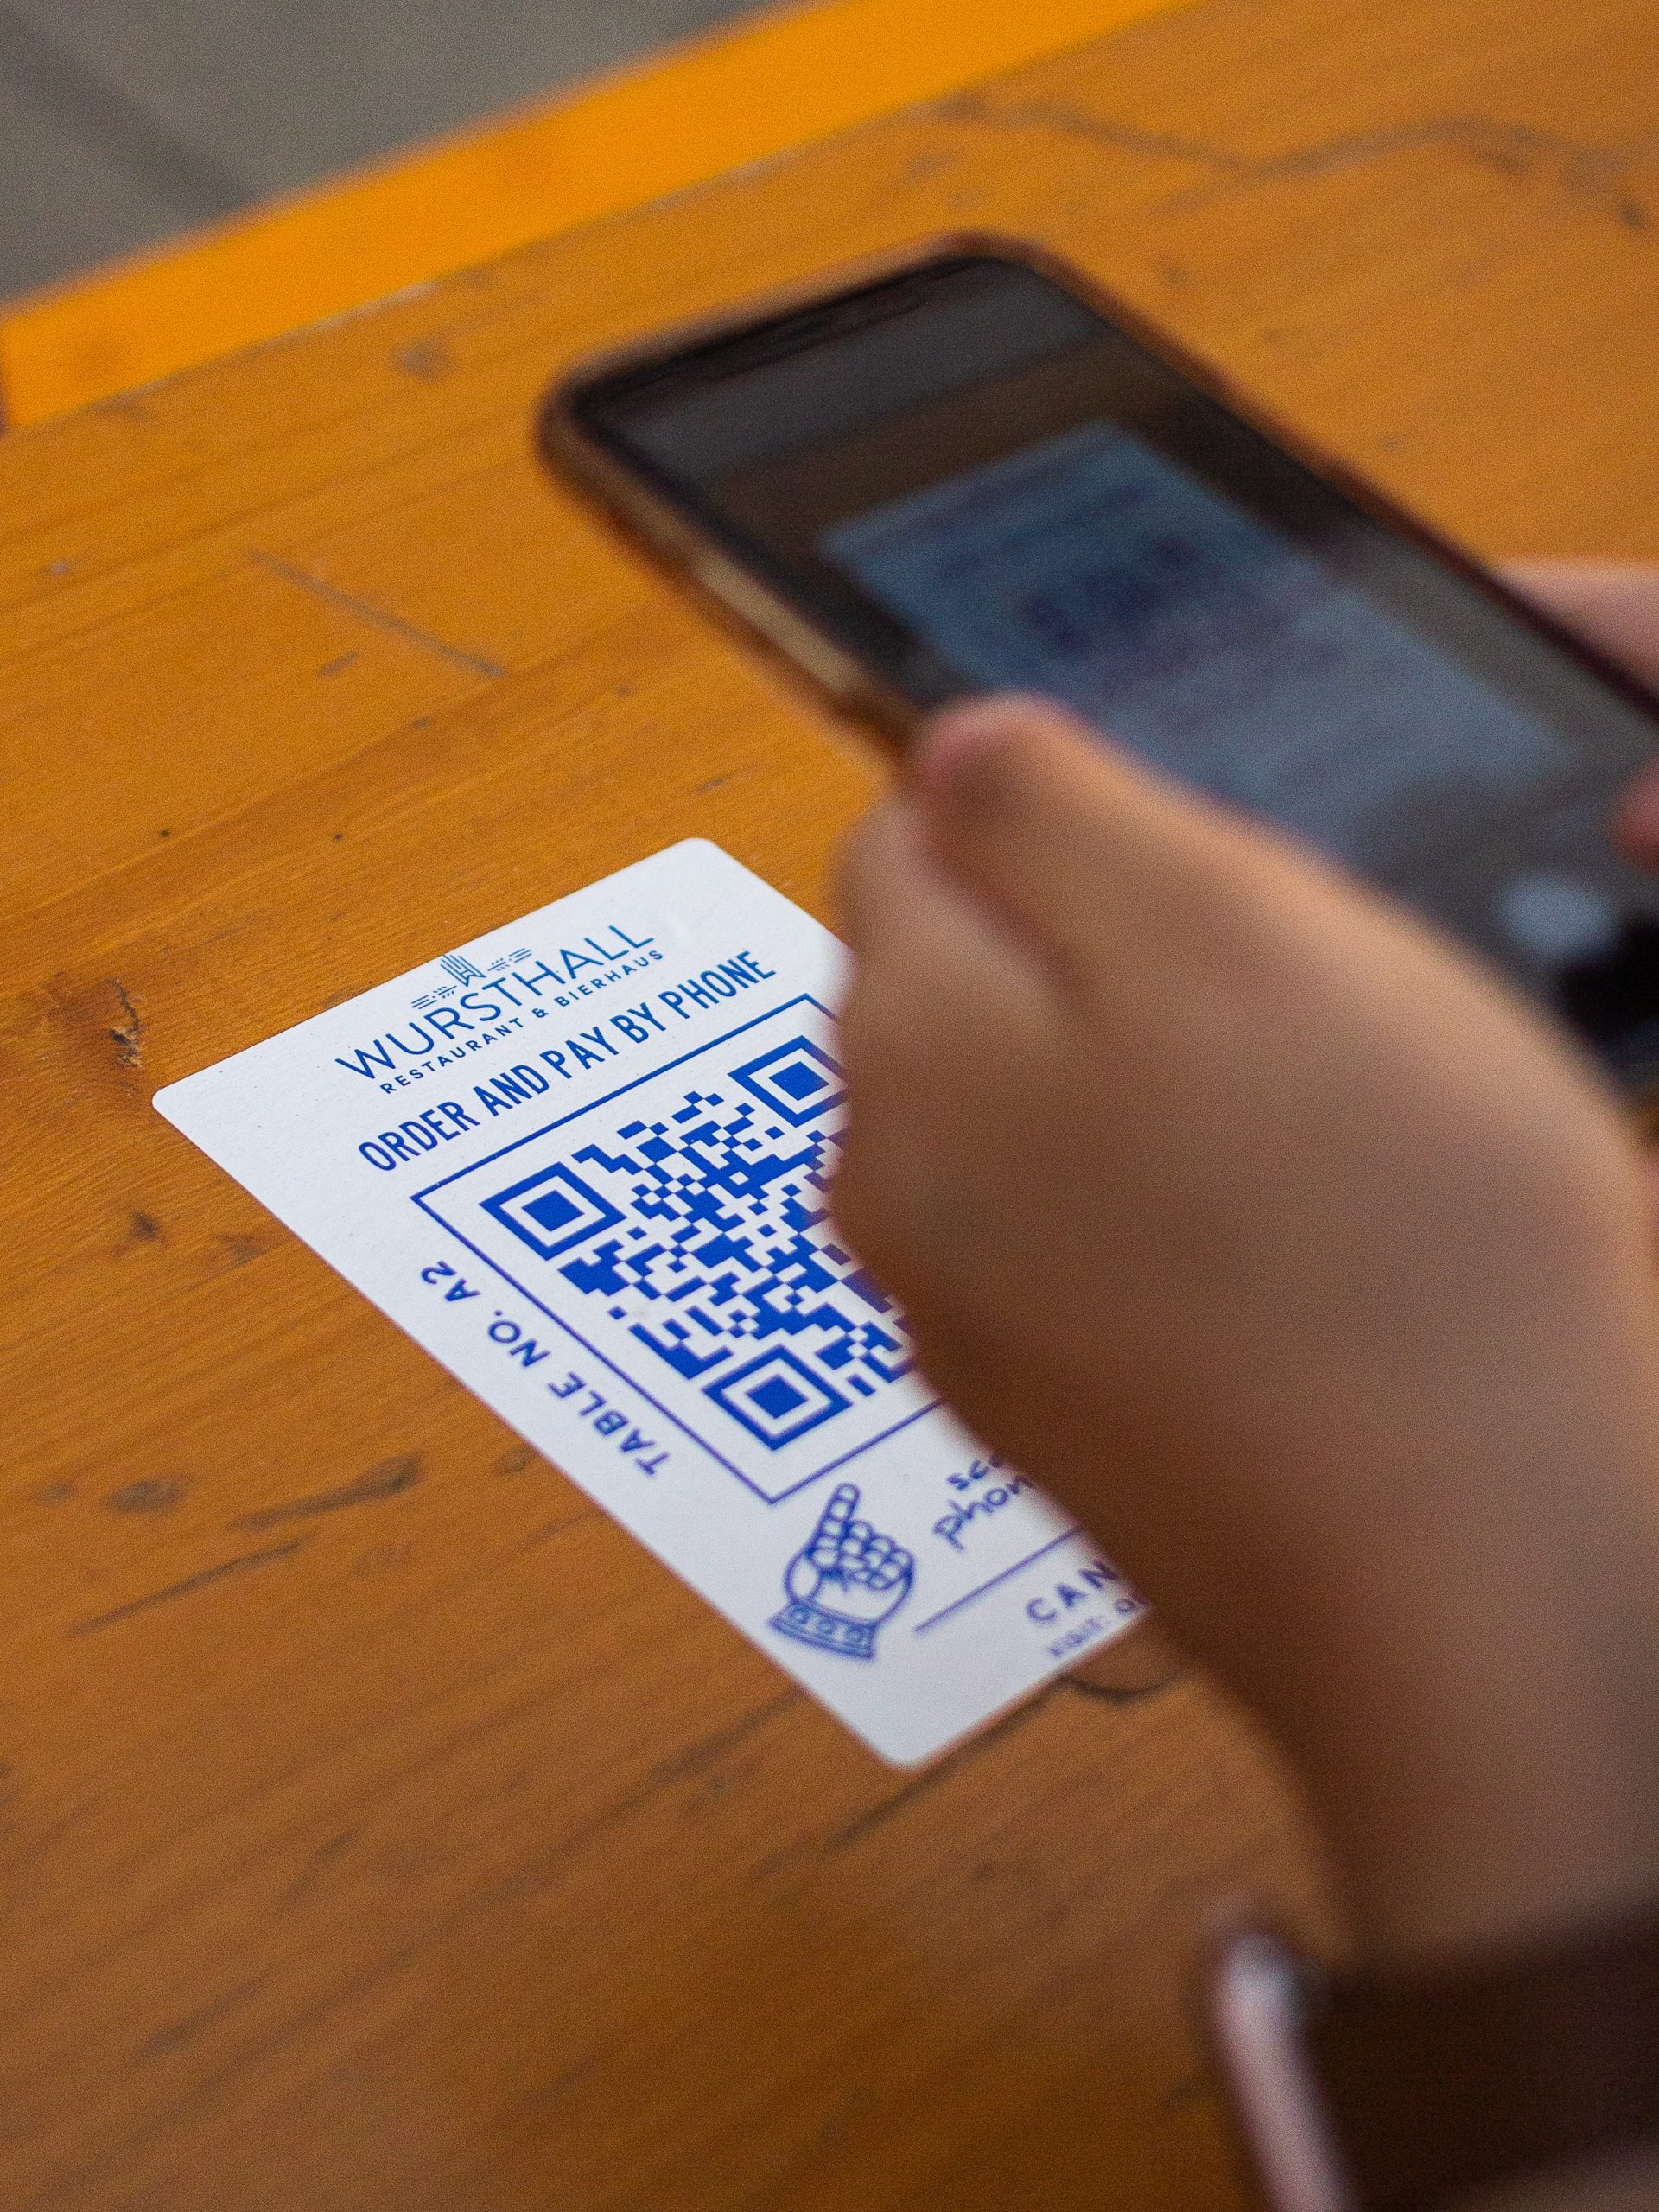 India bars payment firms from issuing new proprietary QR codes to improve interoperability